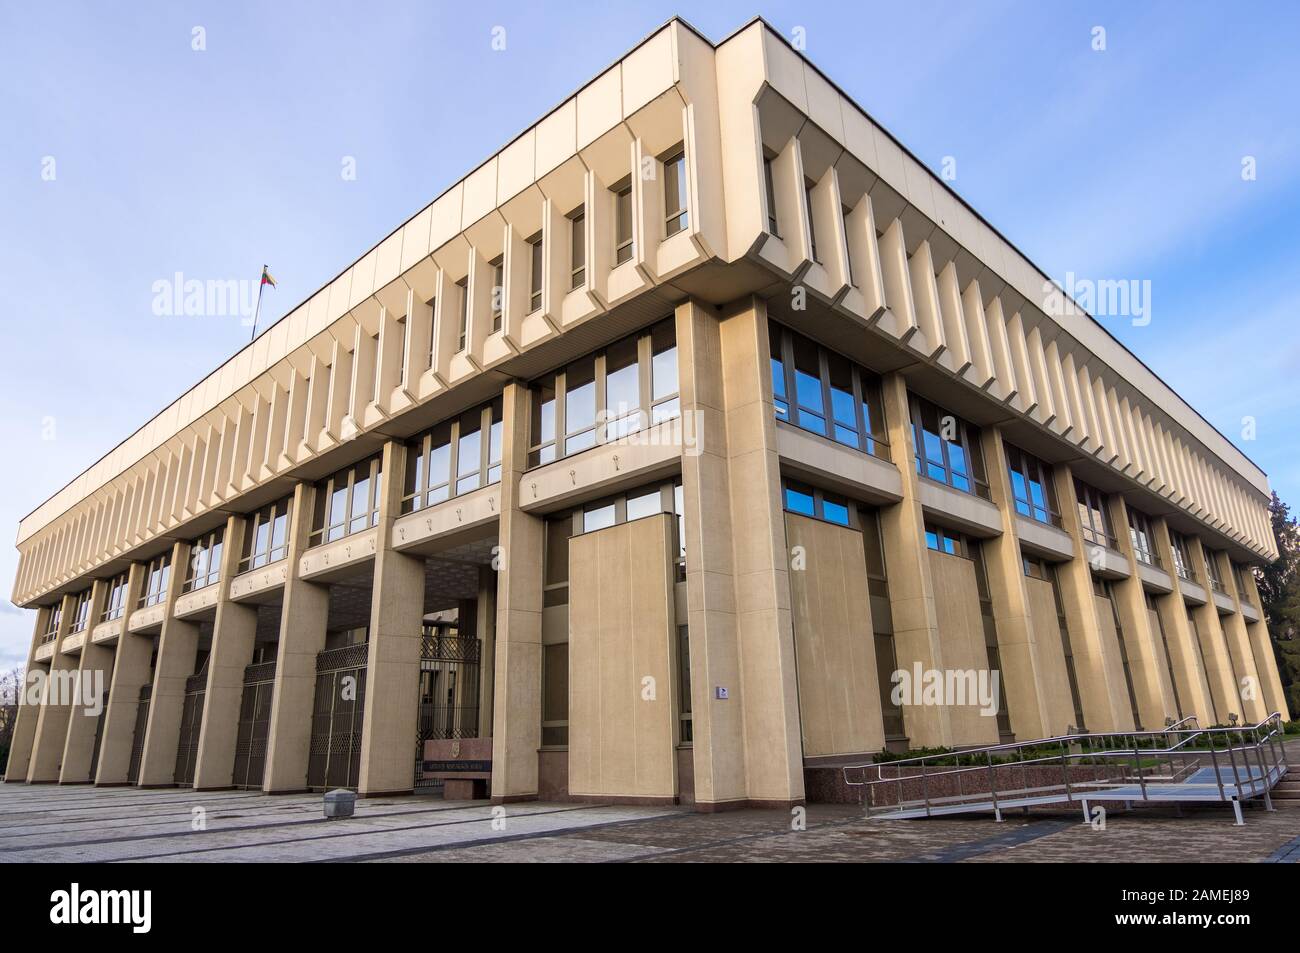 Vilnius, Lithuania - December 16, 2019: The main Building of Seimas Palace in Vilnius, where the parliamentarians of Lithuania gathers Stock Photo